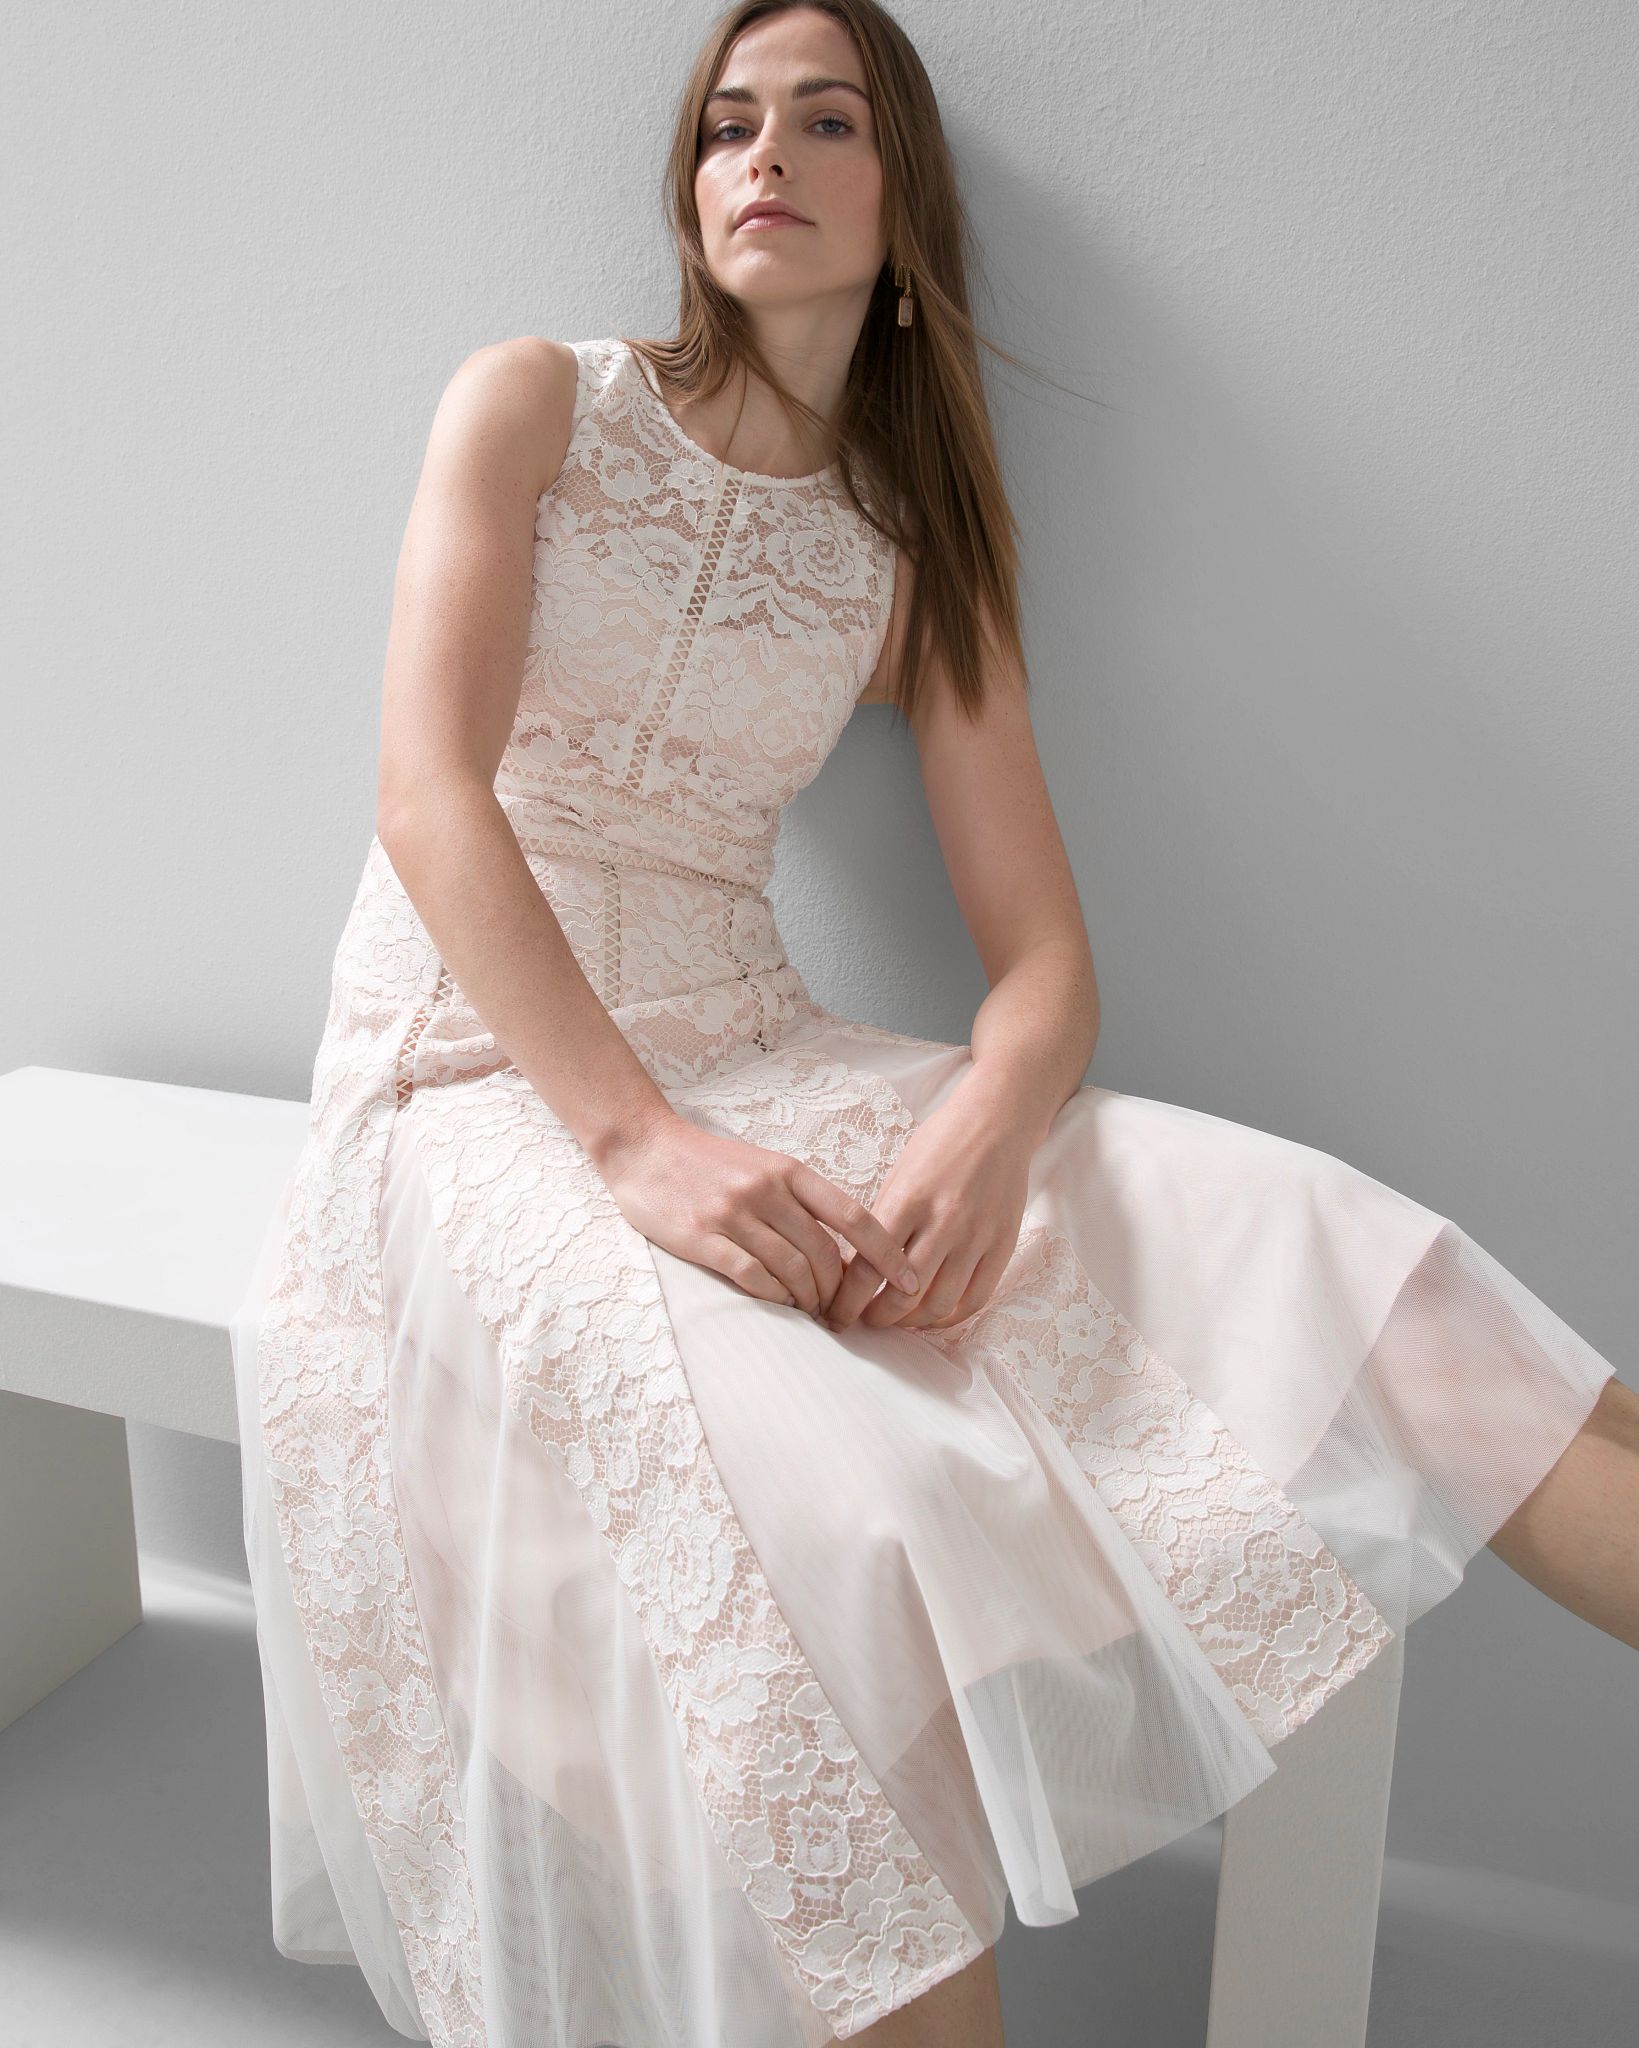 Sleeveless All-Over Lace Fit-and-Flare Godet Dress click to view larger image.